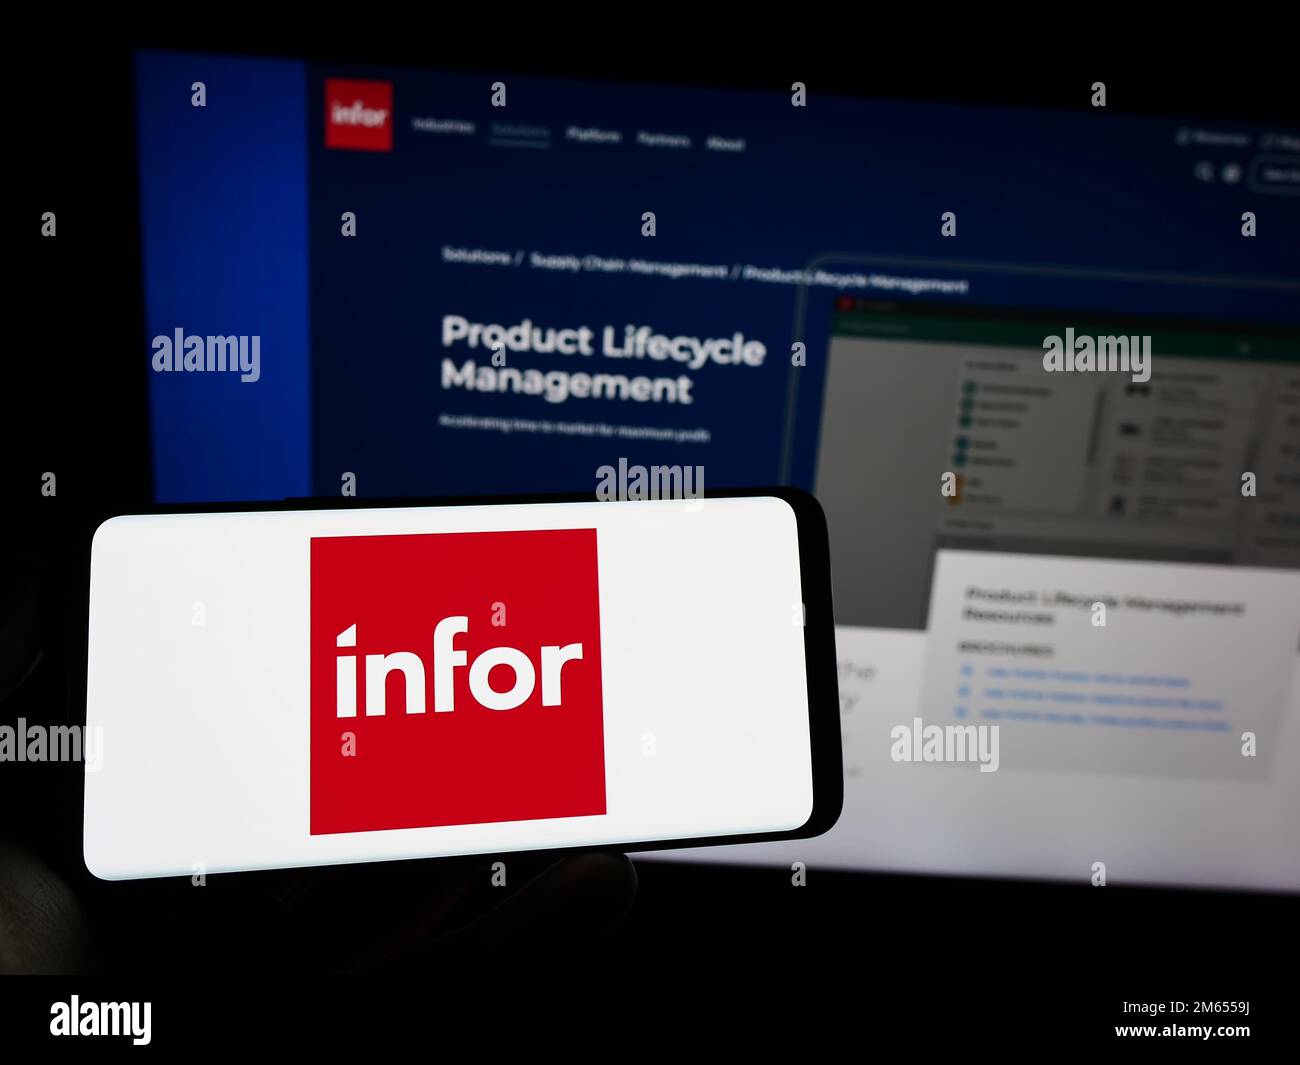 Person holding mobile phone with logo of American enterprise software company Infor on screen in front of website. Focus on phone display. Stock Photo